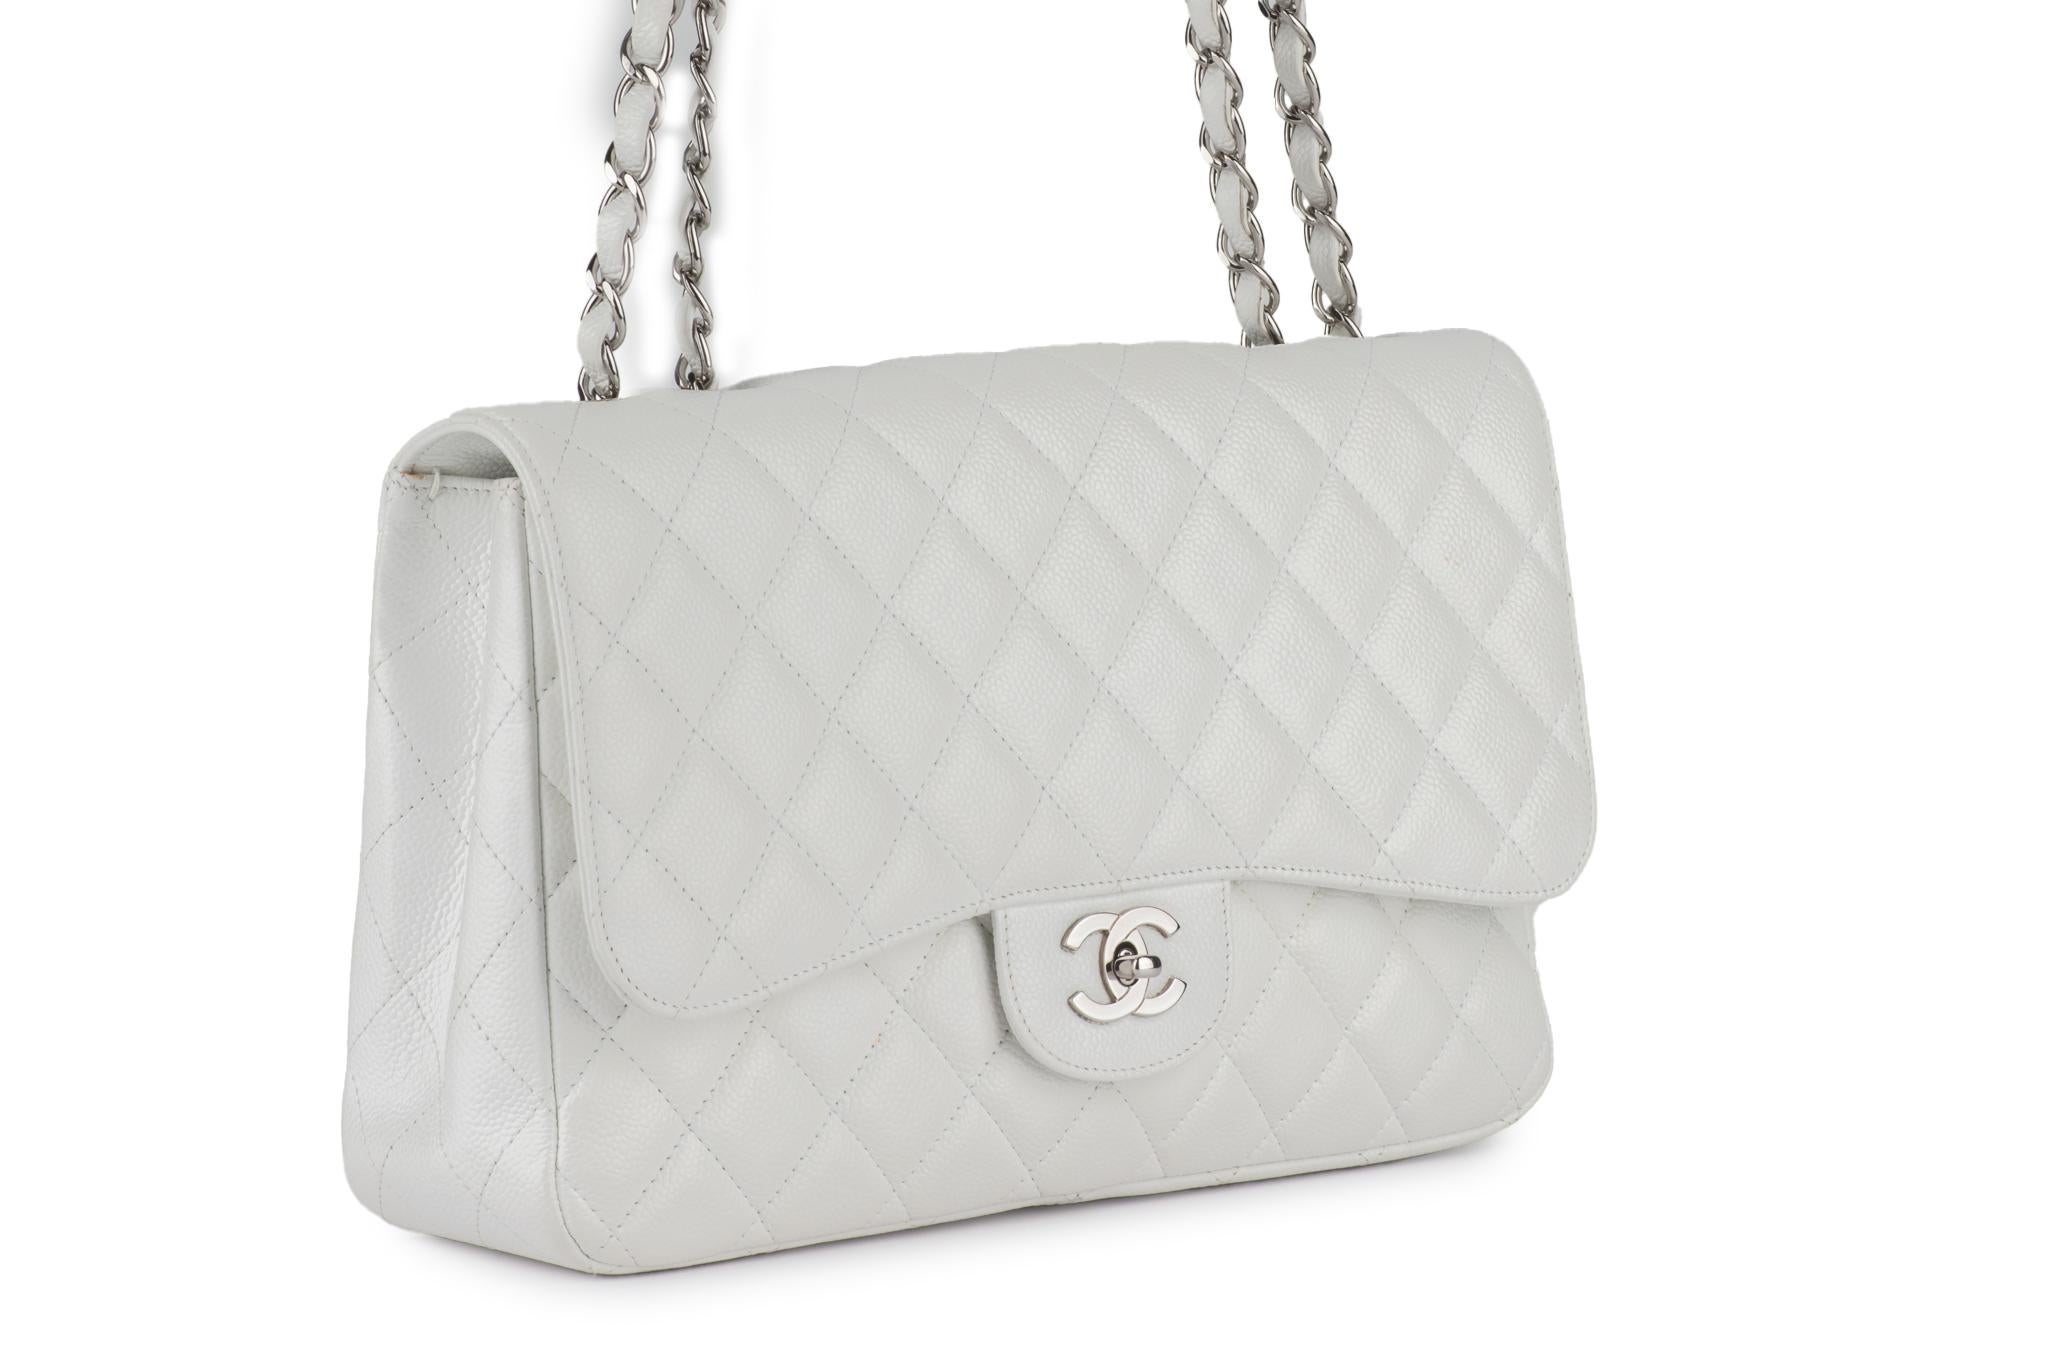 Chanel White Caviar Jumbo Single Flap In Good Condition For Sale In West Hollywood, CA